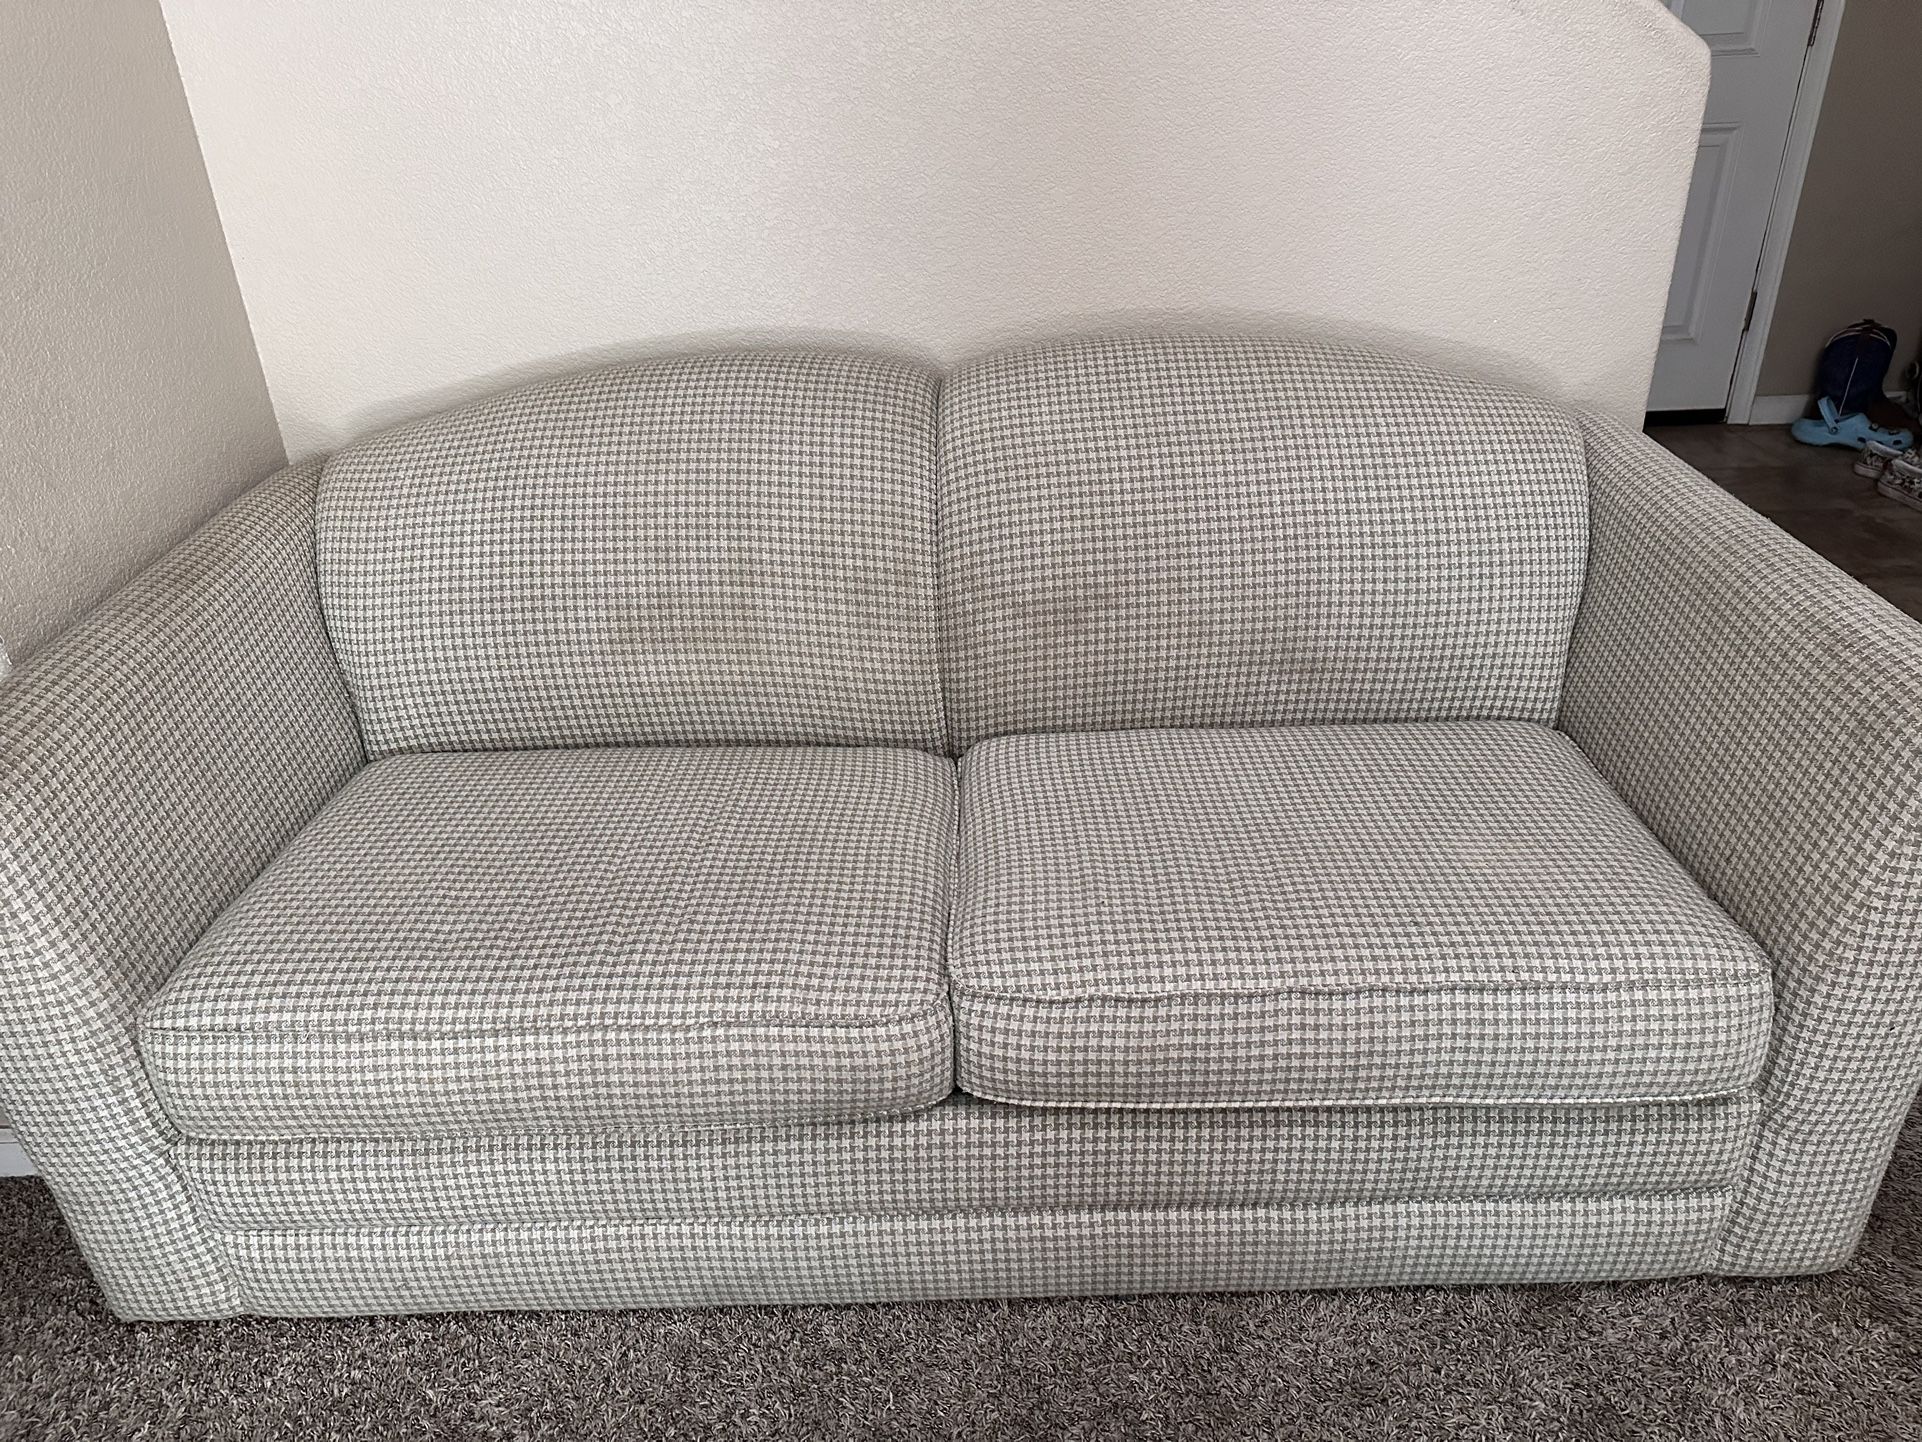 FREE Sofa/Couch 